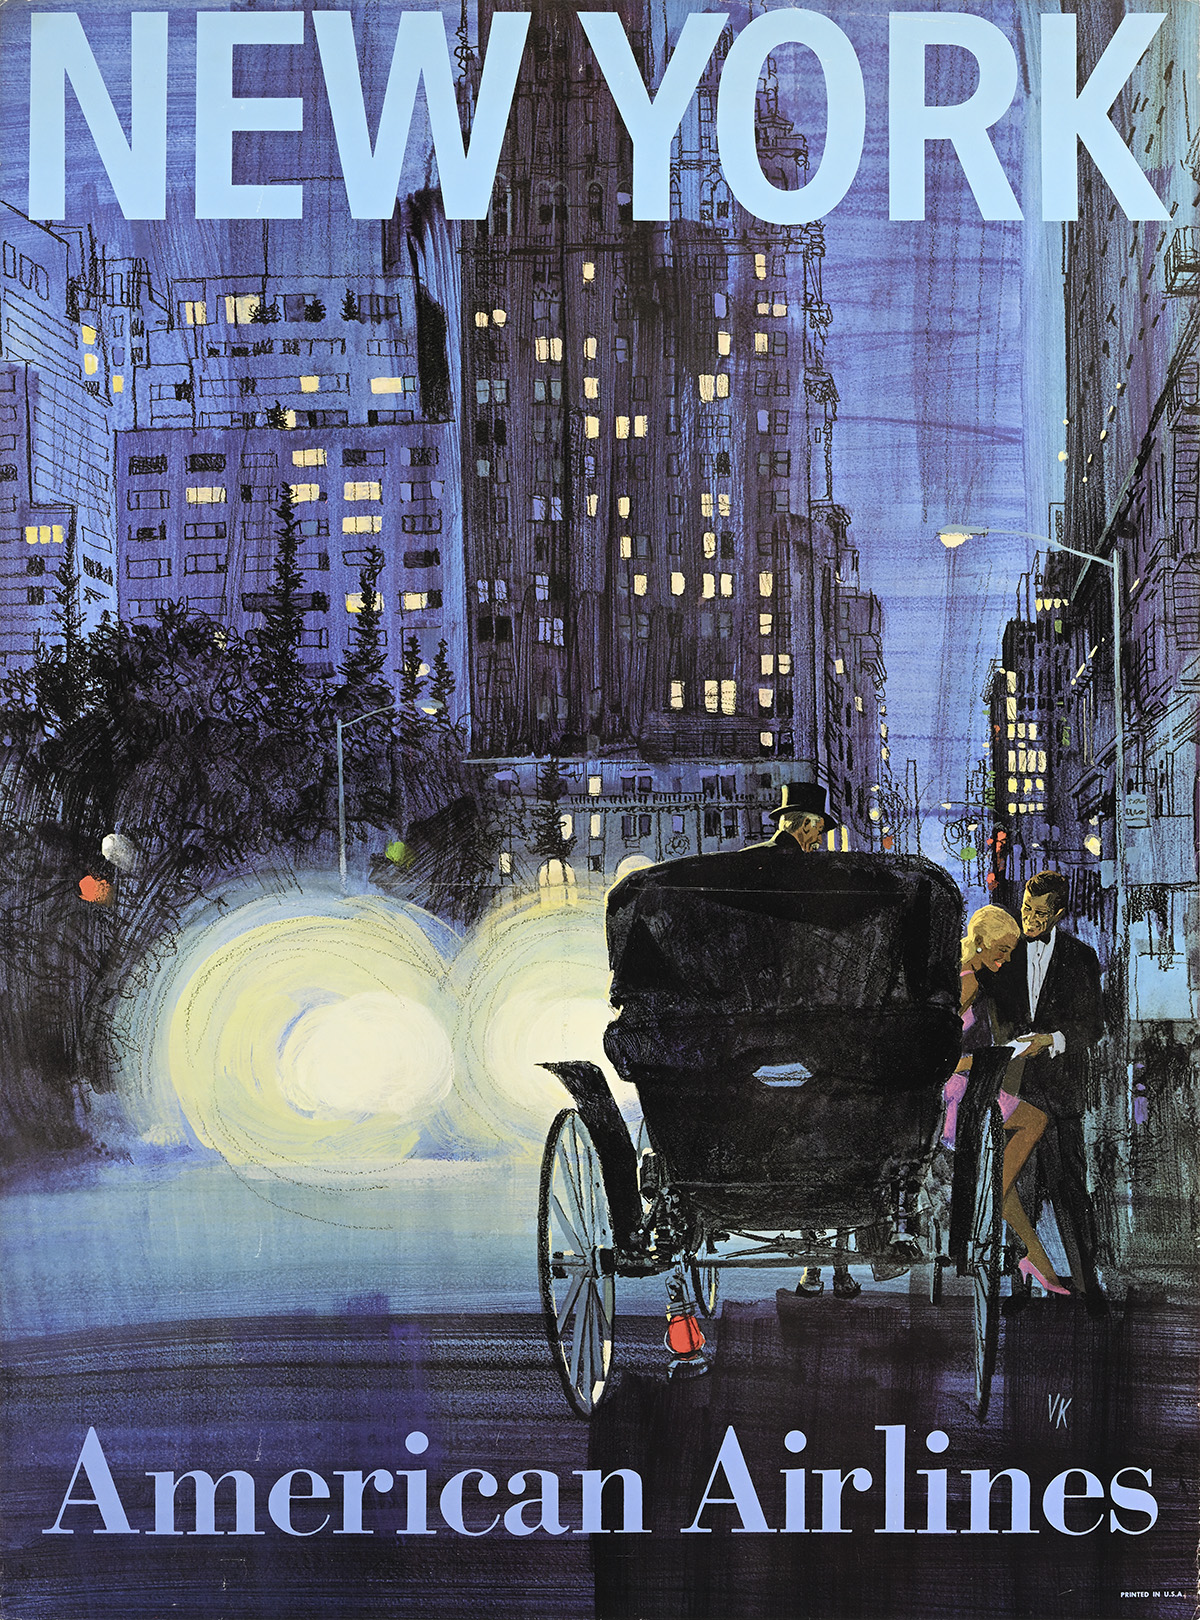 A poster of couple leaving a carriage with a car's headlights emerging, during a twilight evening.